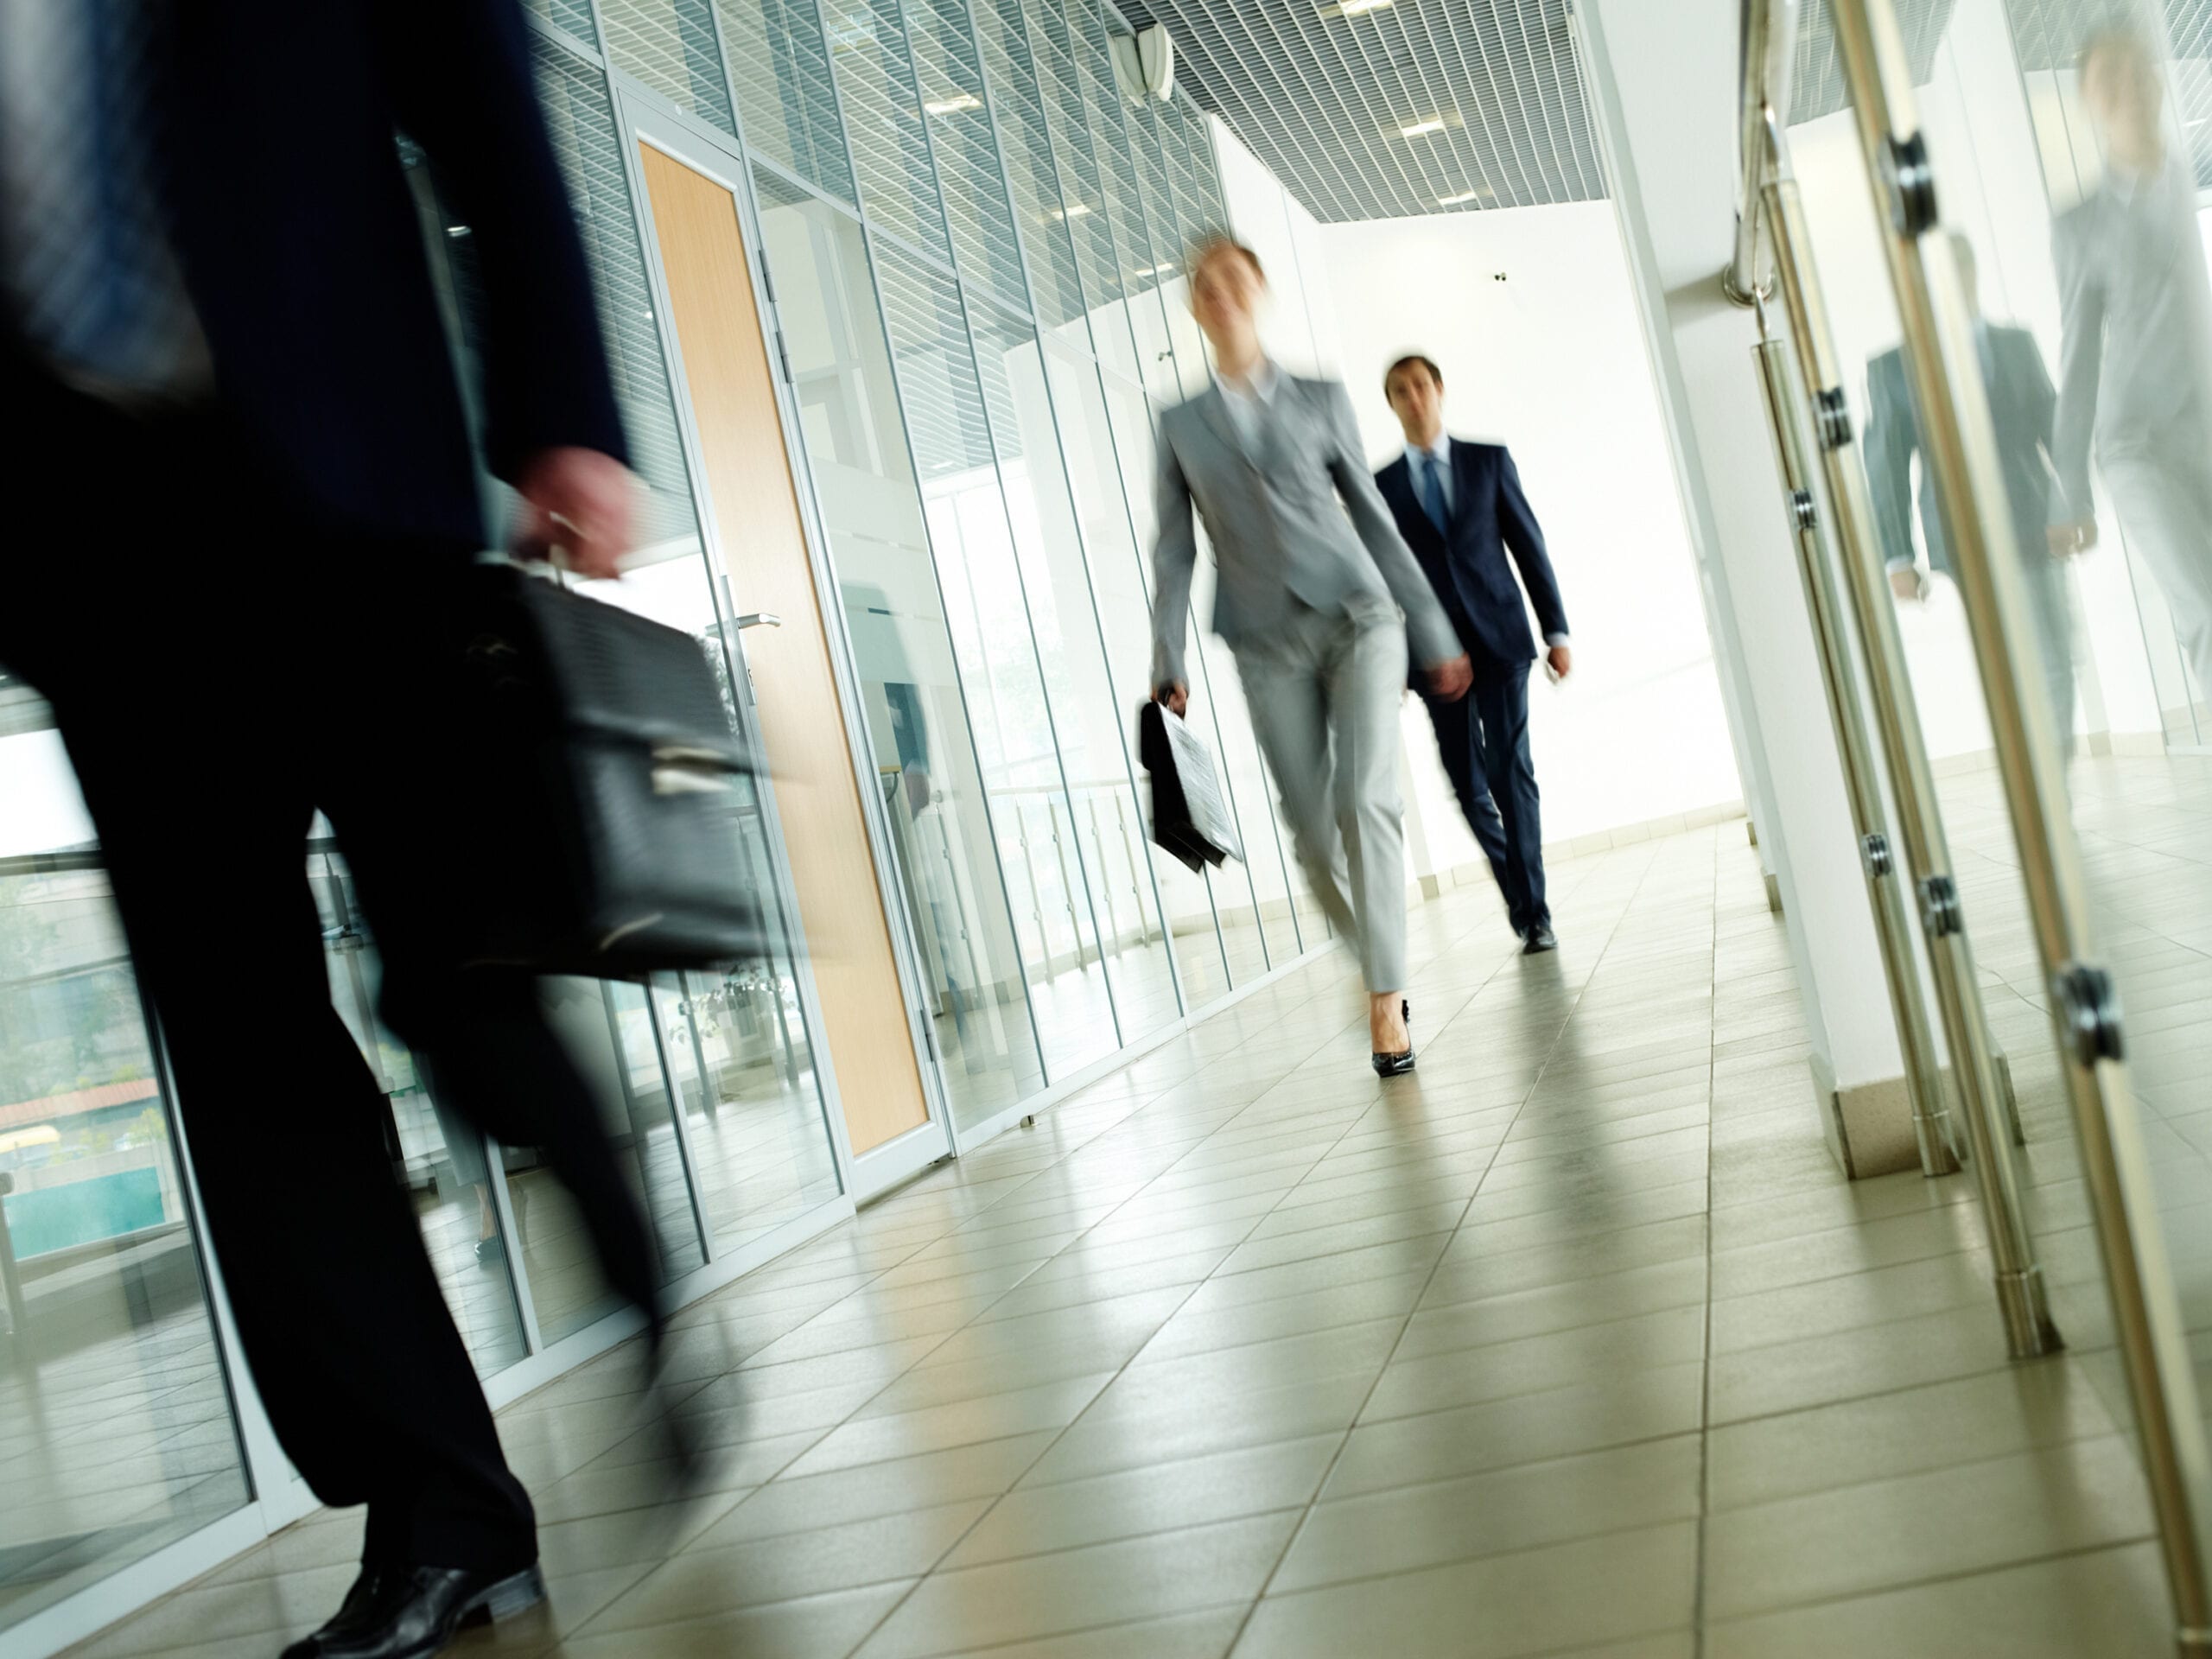 Business people walking down a hallway. RDM has extensive experience in employment and labor law.